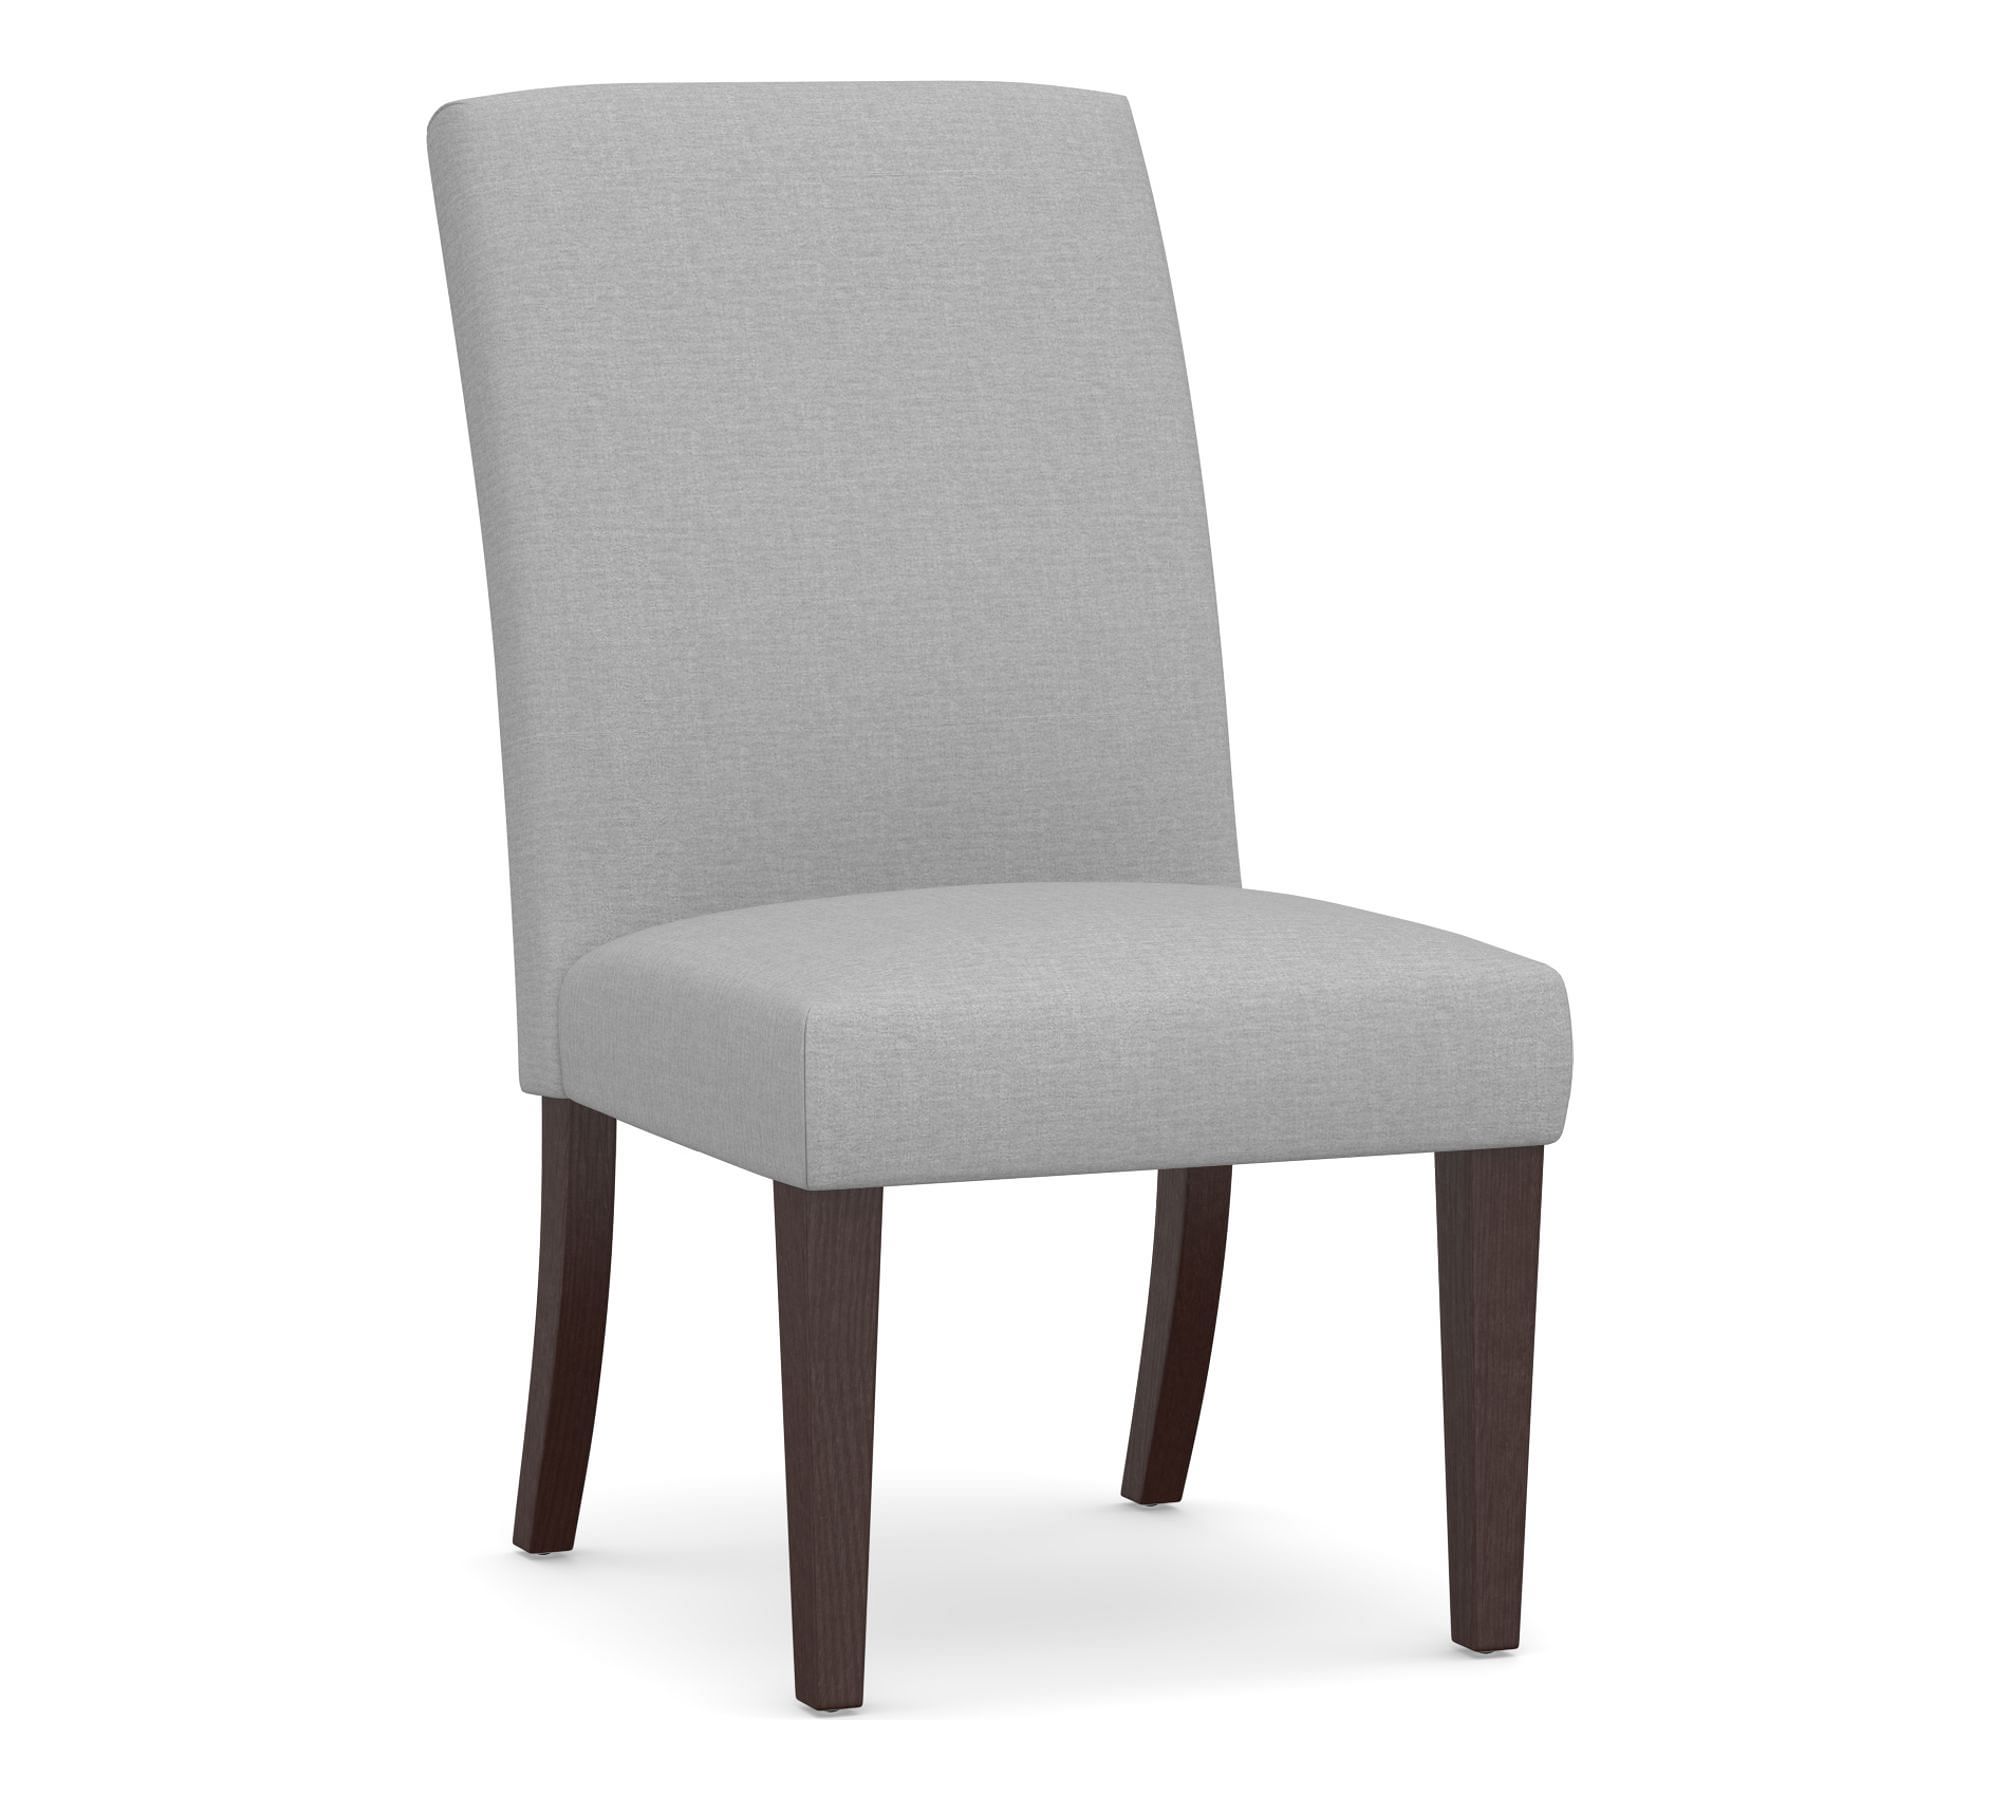 Open Box: PB Comfort Square Upholstered Dining Chair